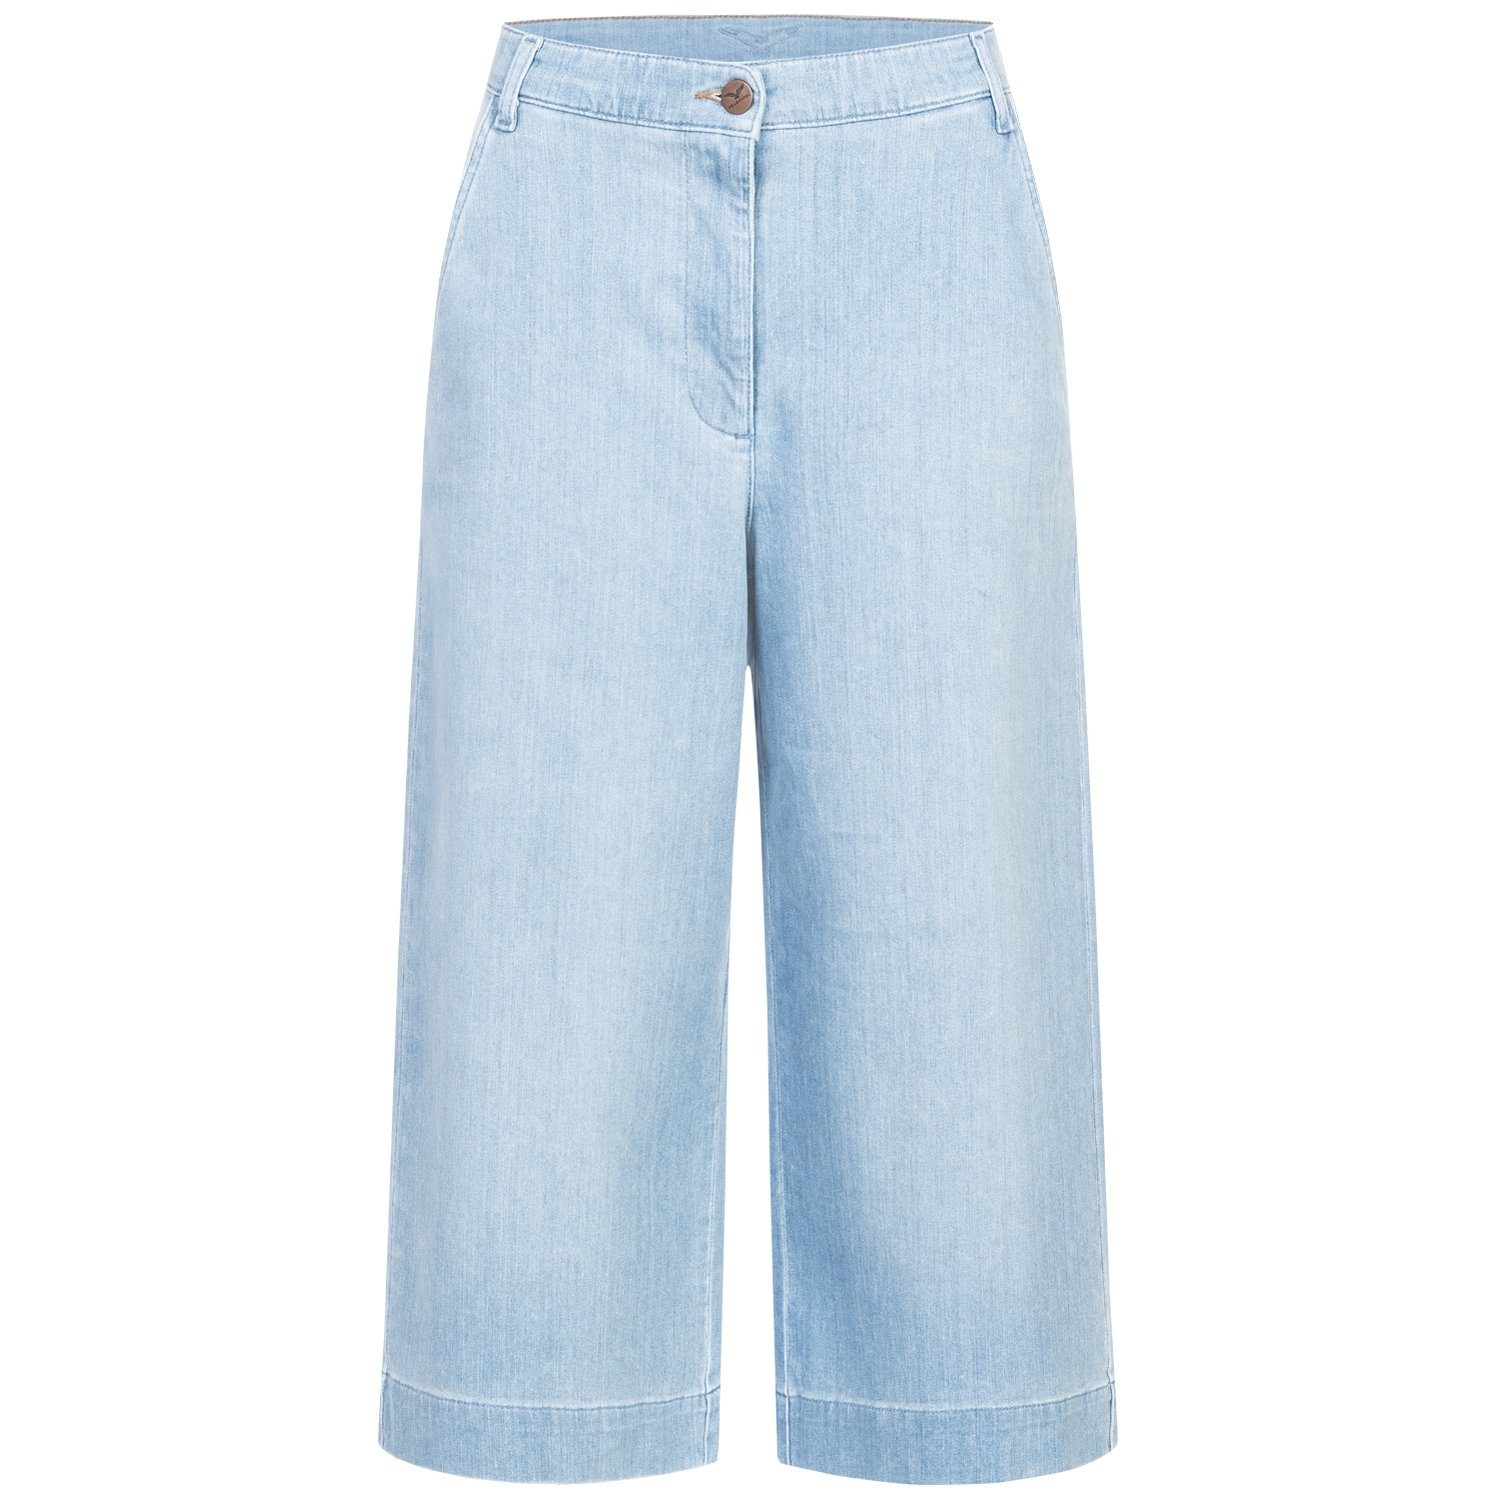 Summersky Taille, Culotte Jeans, Hohe Weites 5-Pocket-Style, Feuervogl fv-Fred:rika, Waist, High Bein, Jeans Culotte Jeans Hyperflex Weite